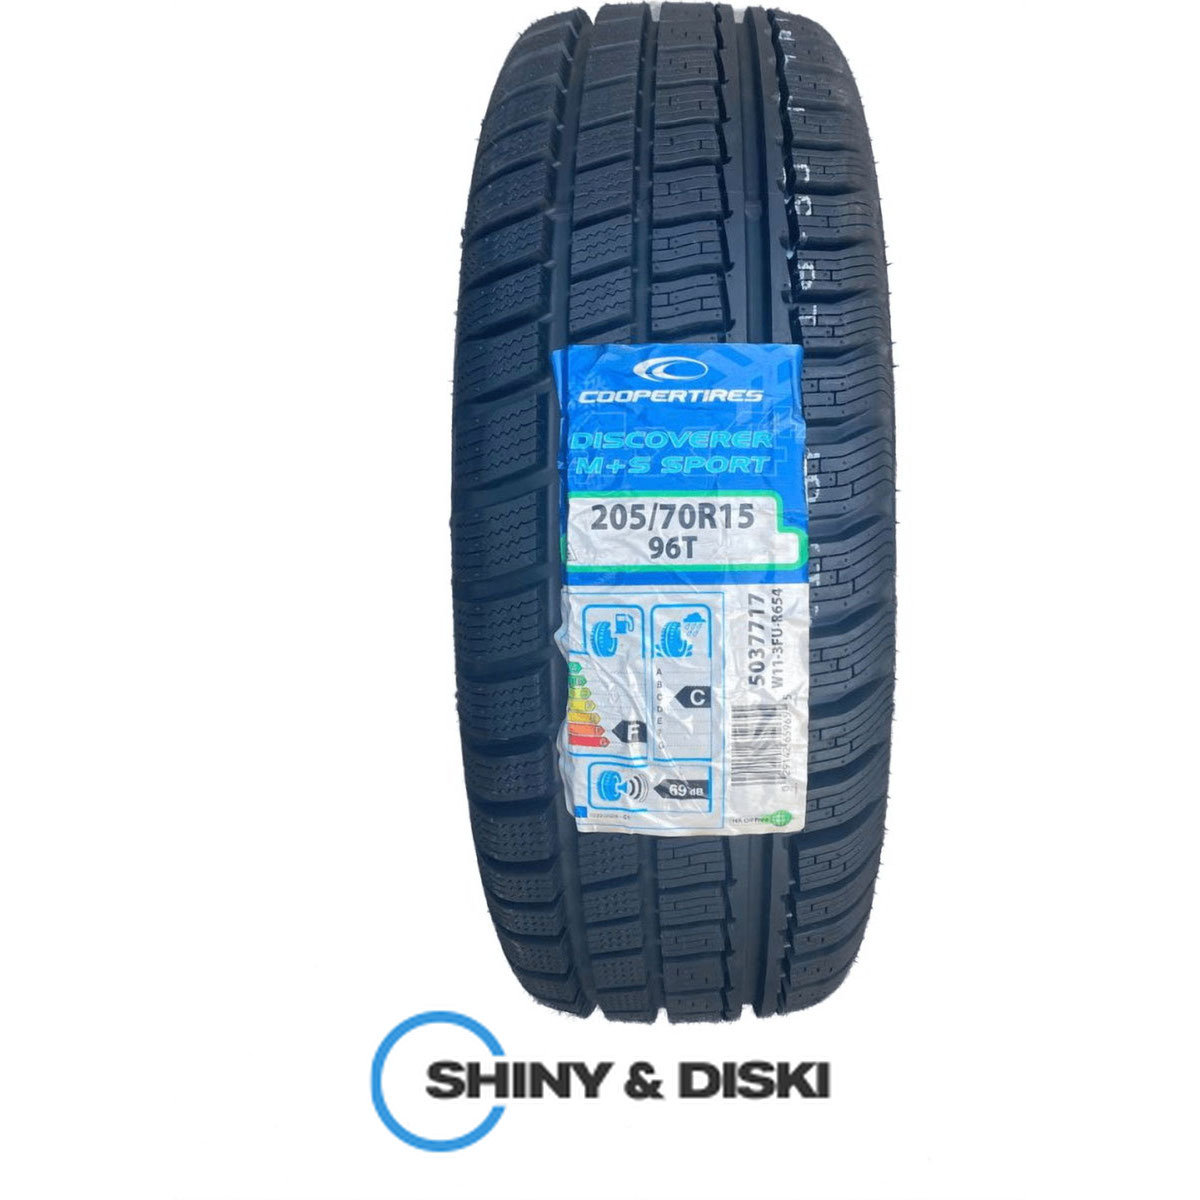 покрышки cooper discoverer m+s sport 205/70 r15 96t